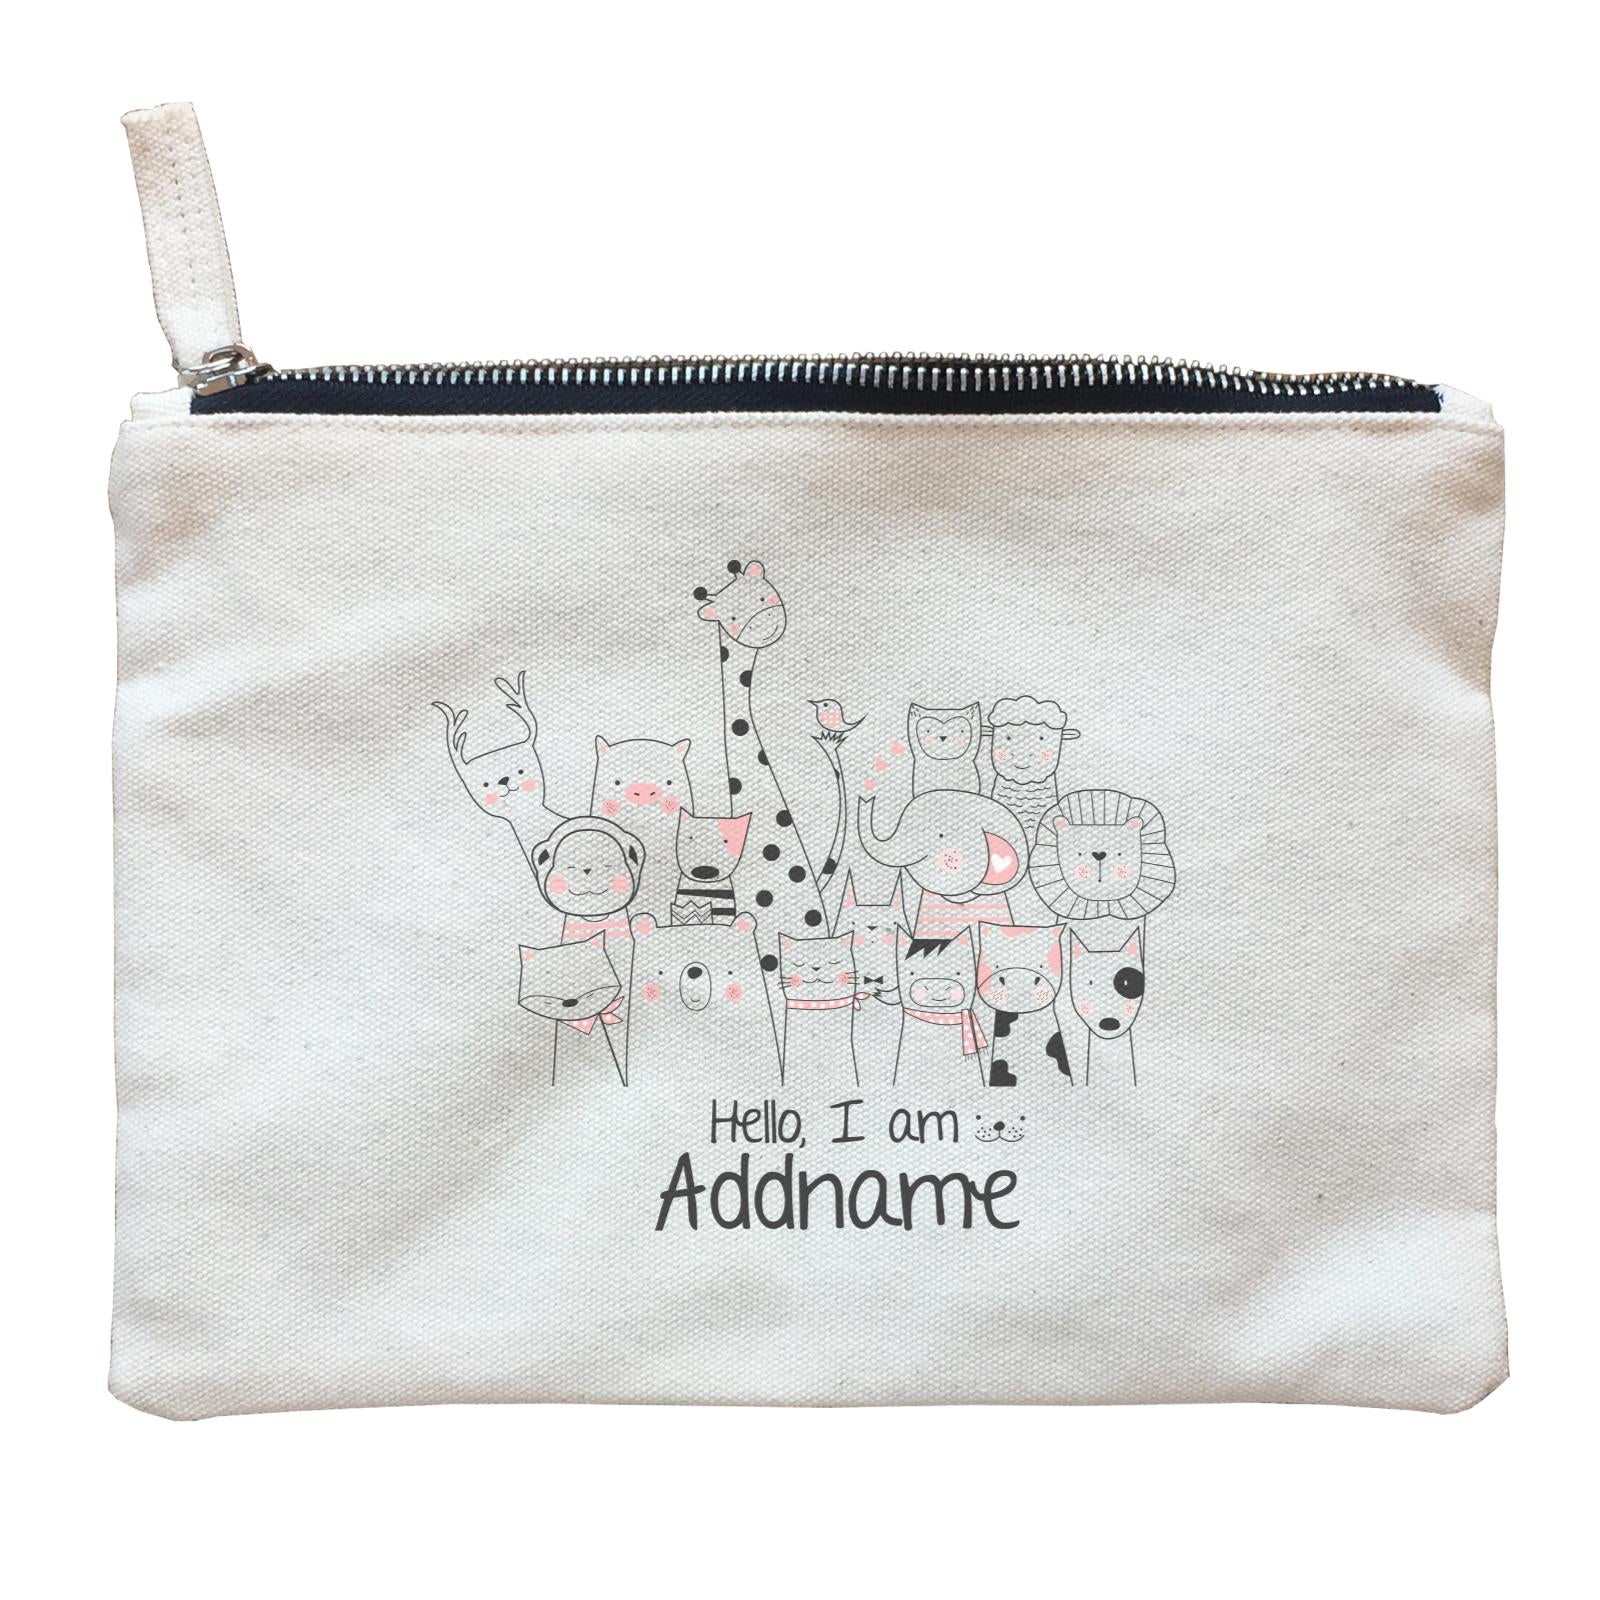 Cute Animals And Friends Series Animal Group Hello I Am Addname Zipper Pouch